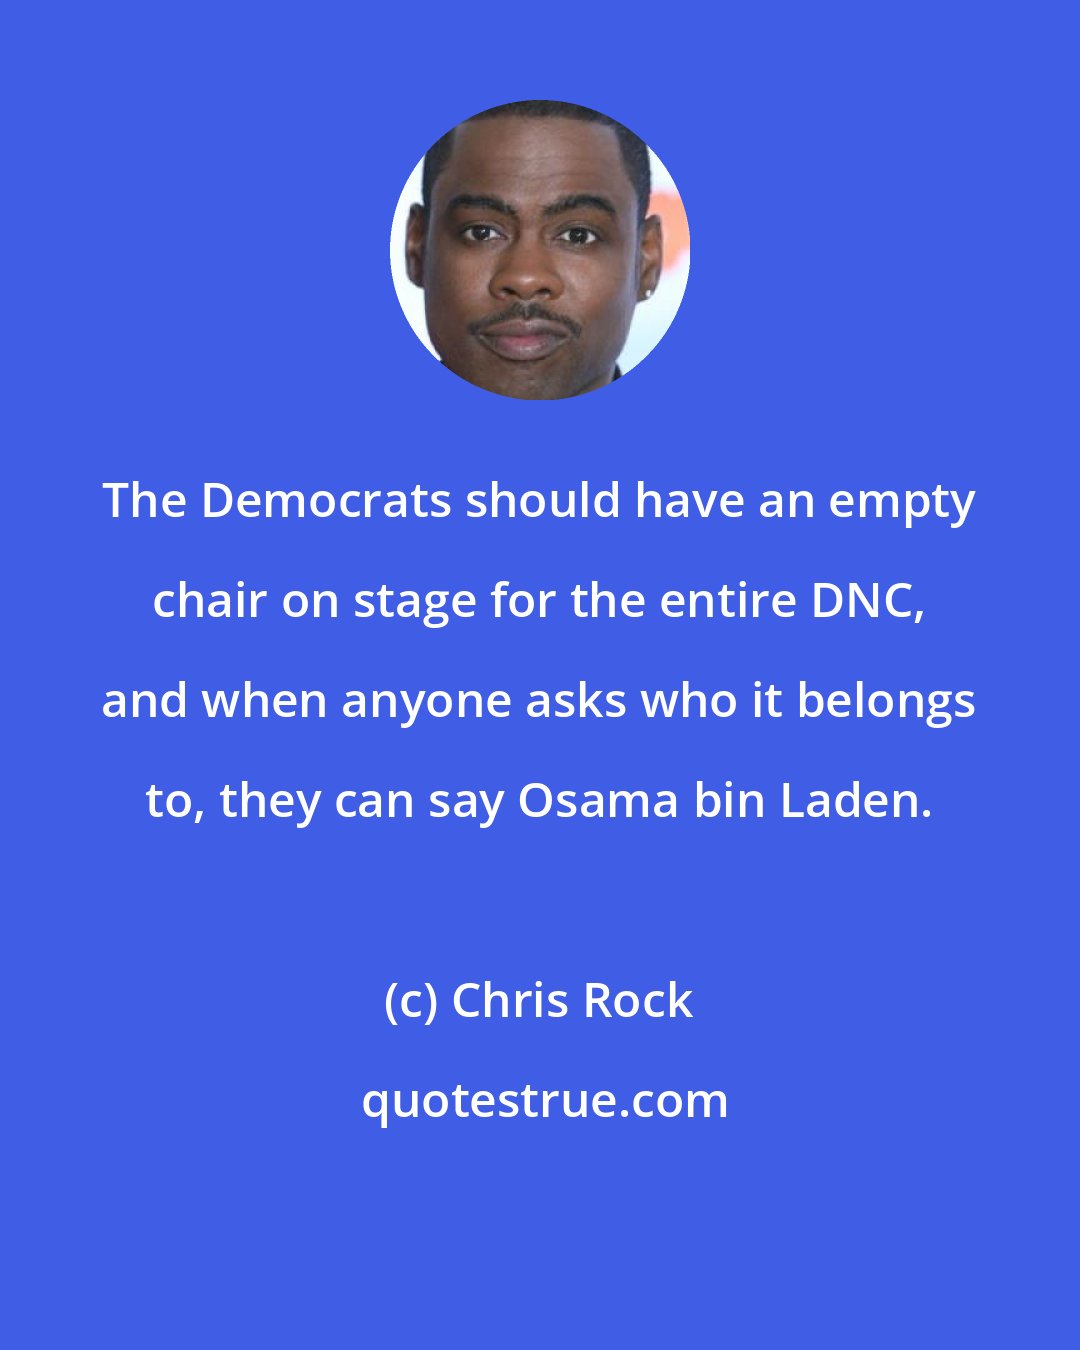 Chris Rock: The Democrats should have an empty chair on stage for the entire DNC, and when anyone asks who it belongs to, they can say Osama bin Laden.